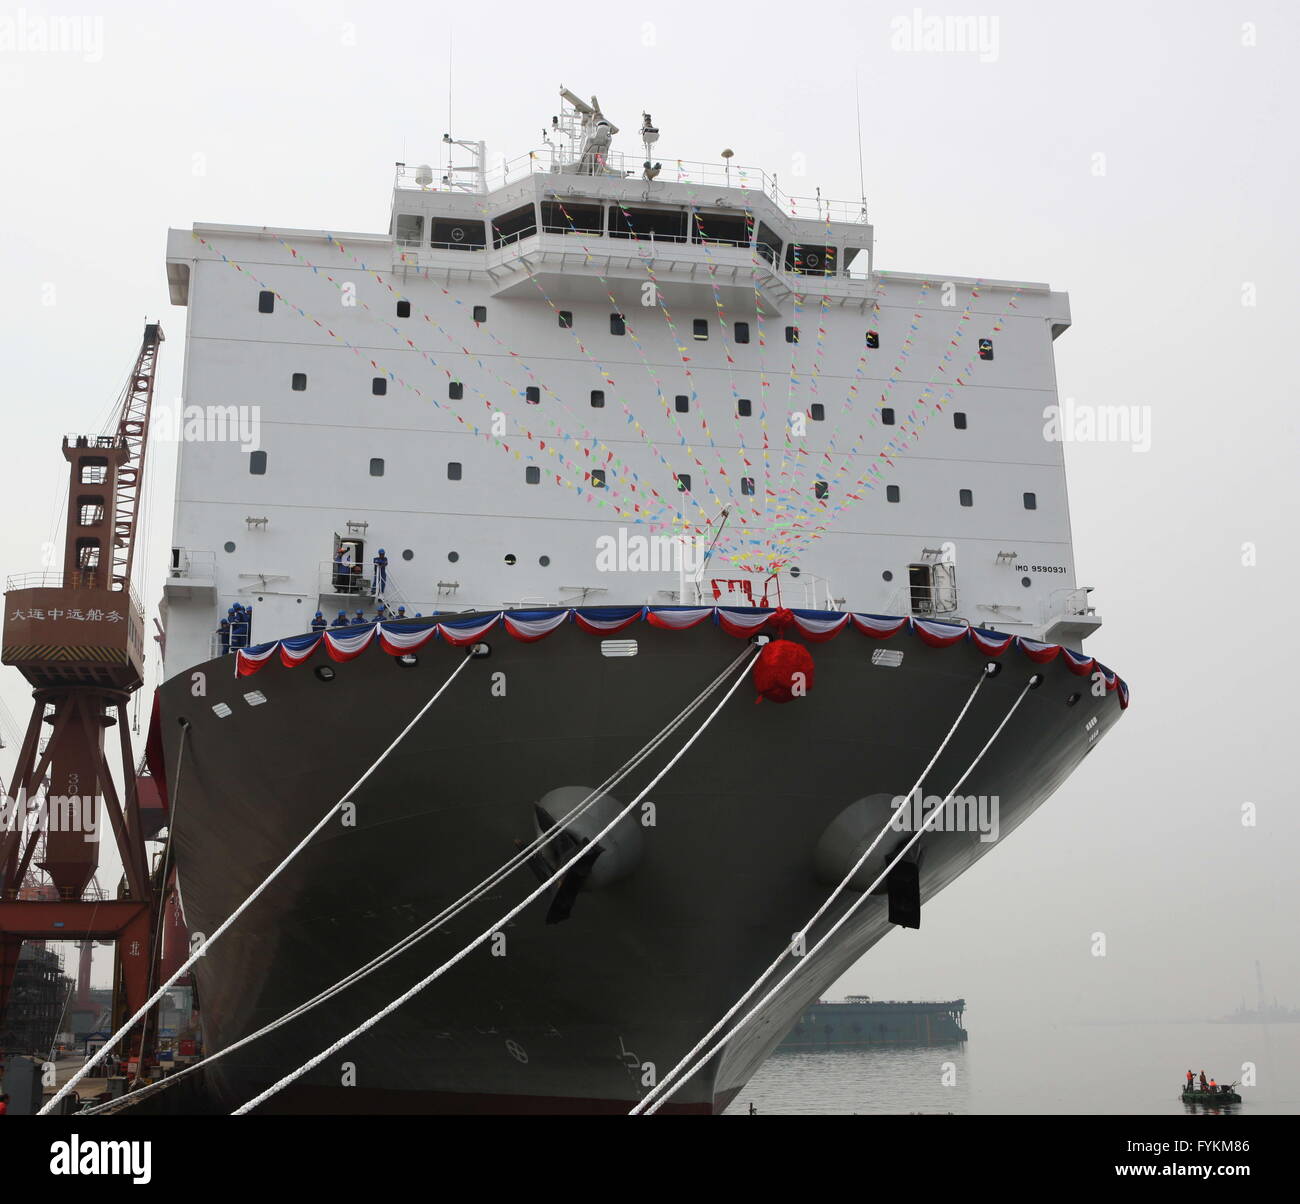 (160427) -- DALIAN, April 27, 2016 (Xinhua) -- Photo taken on April 27, 2016 shows the livestock carrier Ocean Shearer at its unveiling ceremony in Dalian, northeast China's Liaoning Province. The ship is 189.5 meters long, 31.1 meters wide and  and 24.33 meters in moulded depth. Constructed by Cosco Shipyard in Dalian, it is the current largest livestock carrier built in a Chinese shipyard, which could accommodate about 17,000 live cattle. (Xinhua/Ding Hongfa) (zhs) Stock Photo